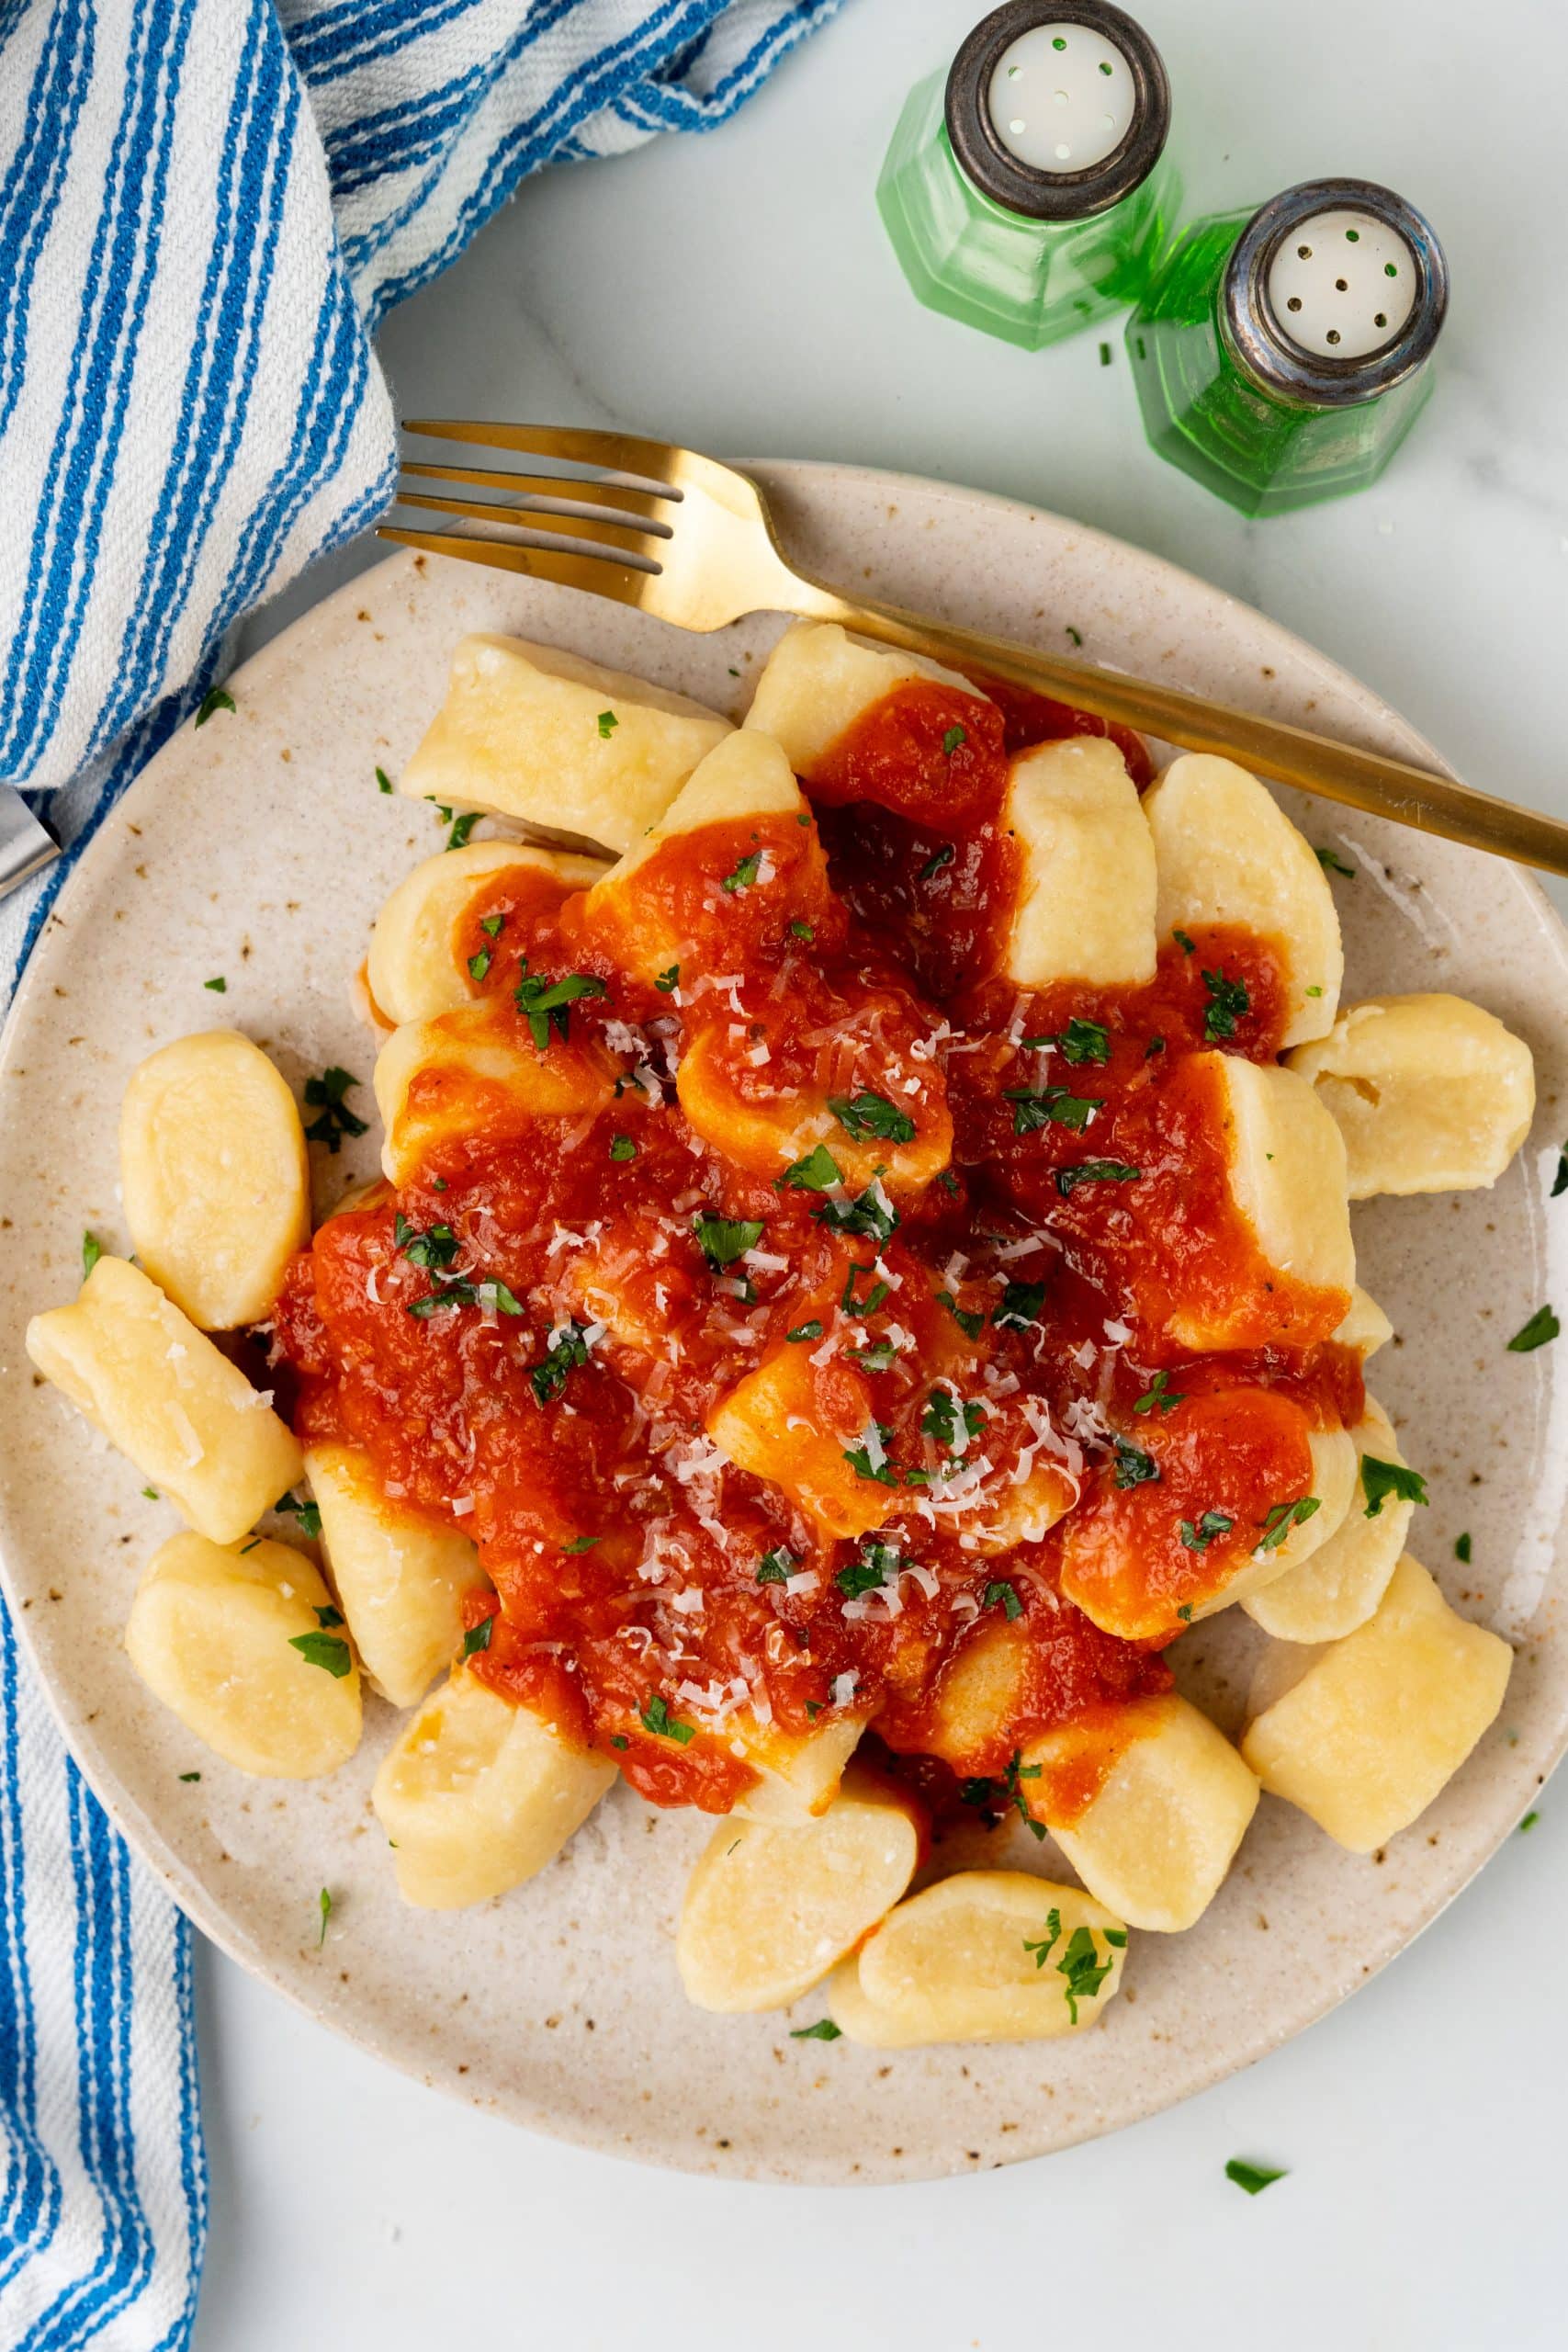 easy ricotta gnocchi on a speckled white plate topped with red sauce, herbs, and cheese